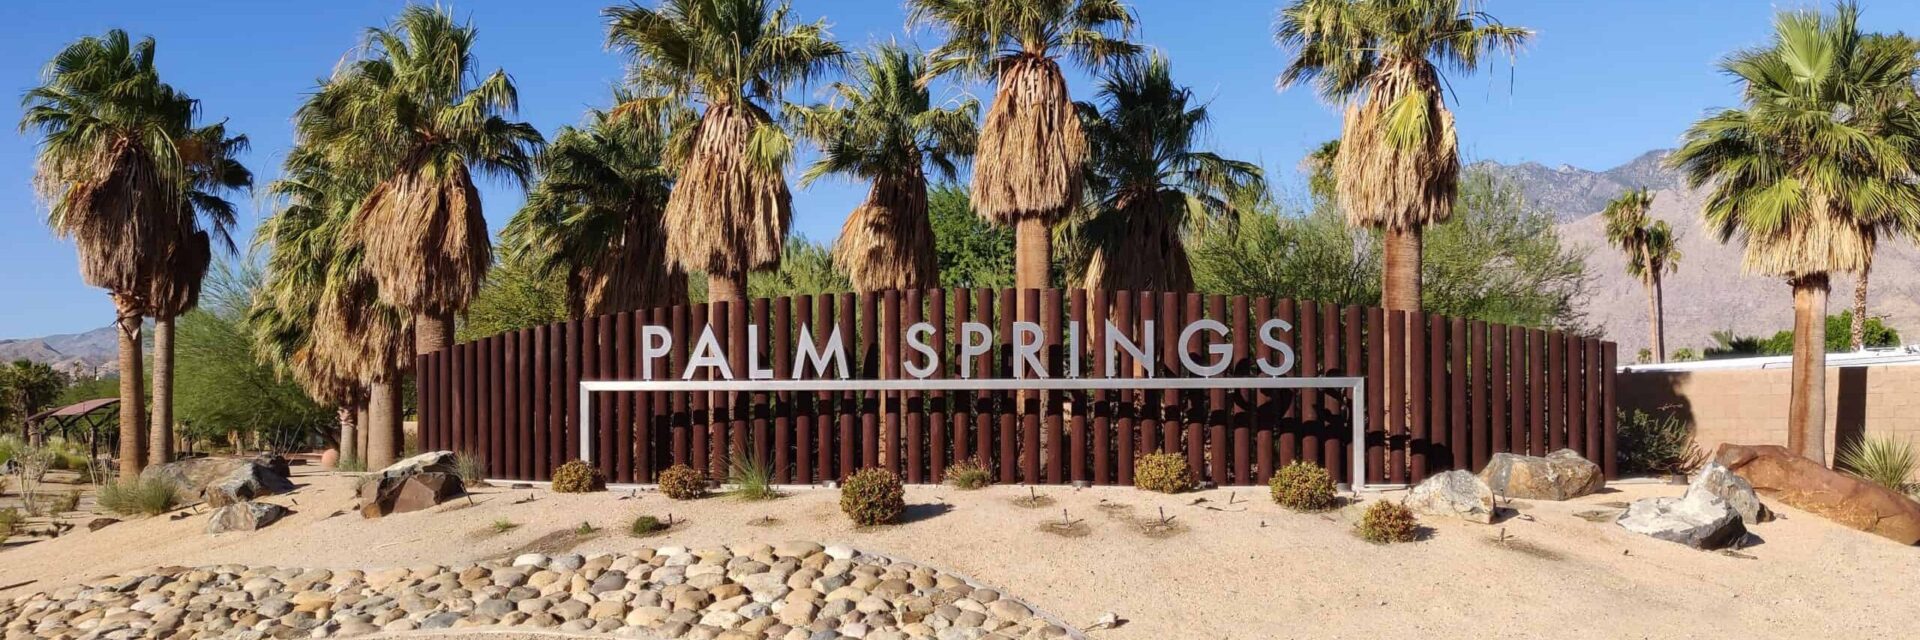 Palm Springs Sign